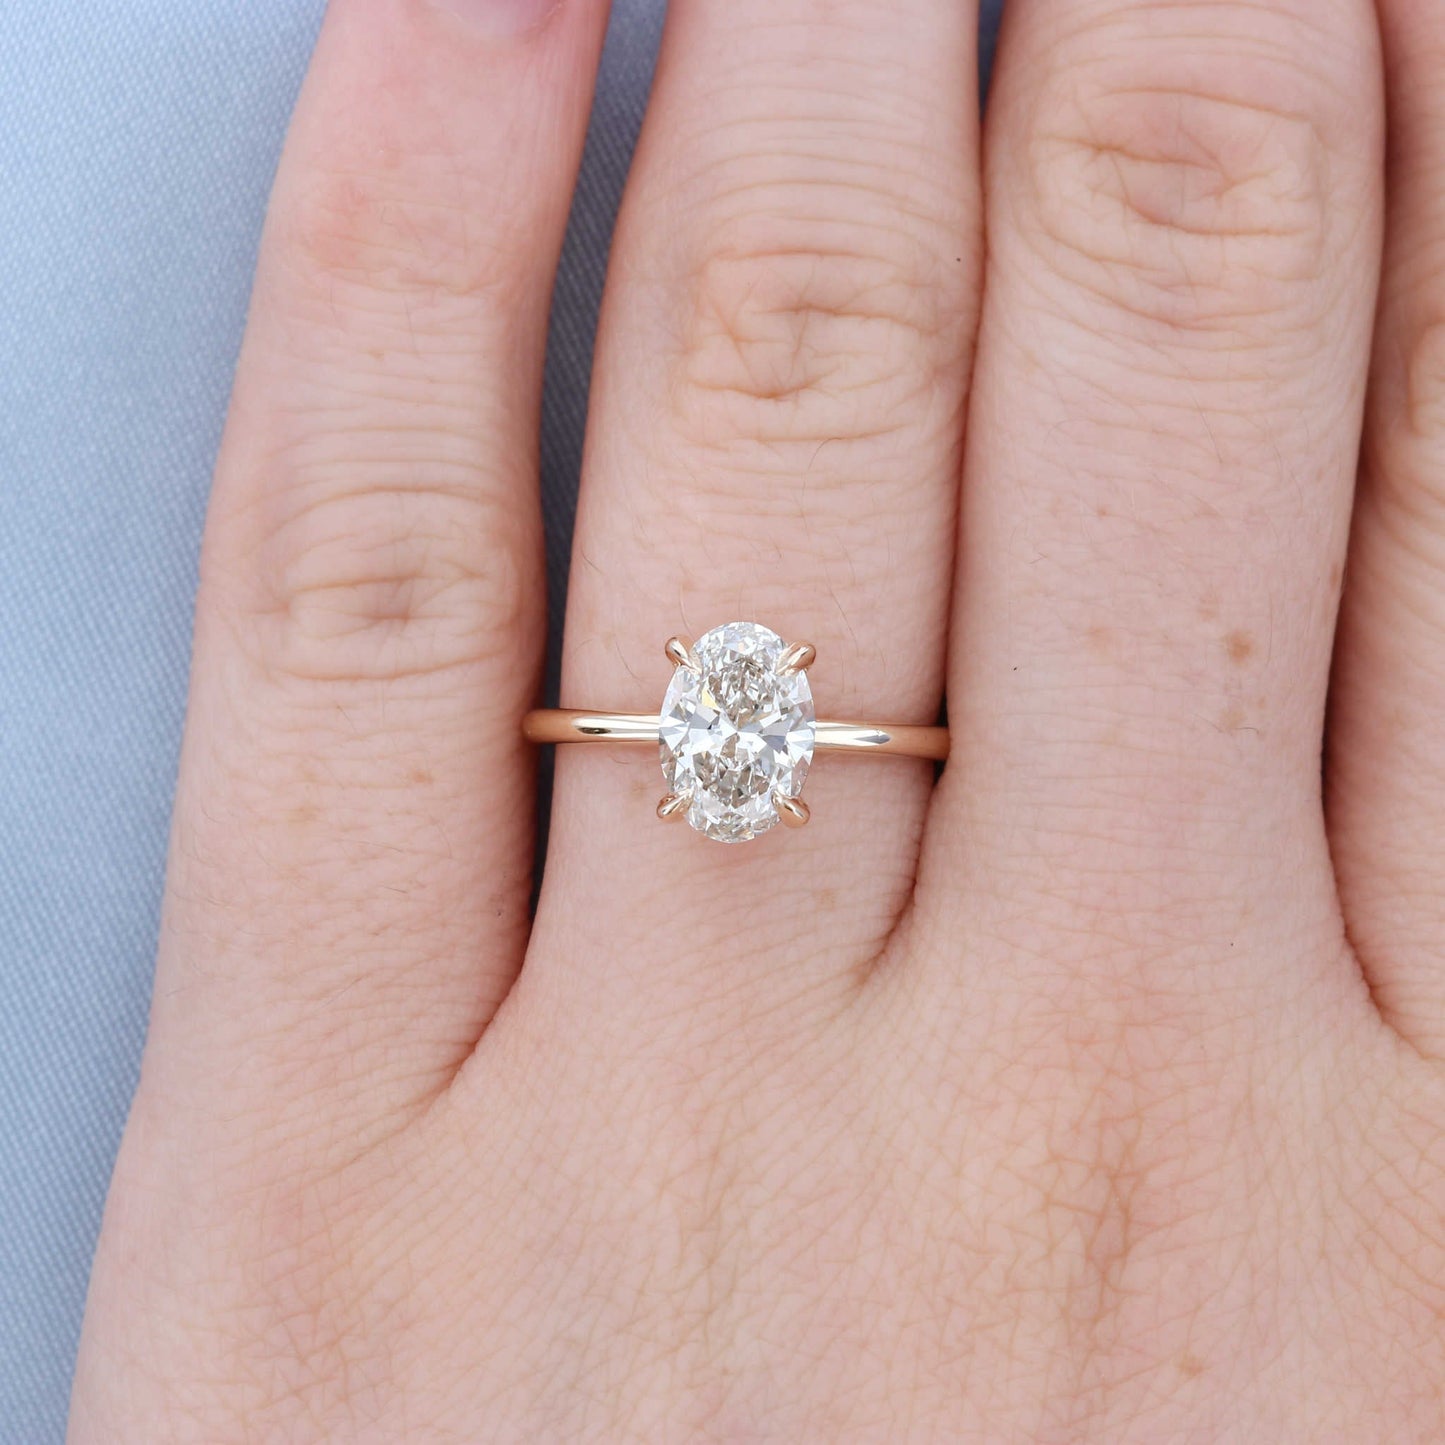 Oval Solitaire Diamond Engagement Ring on a Finger